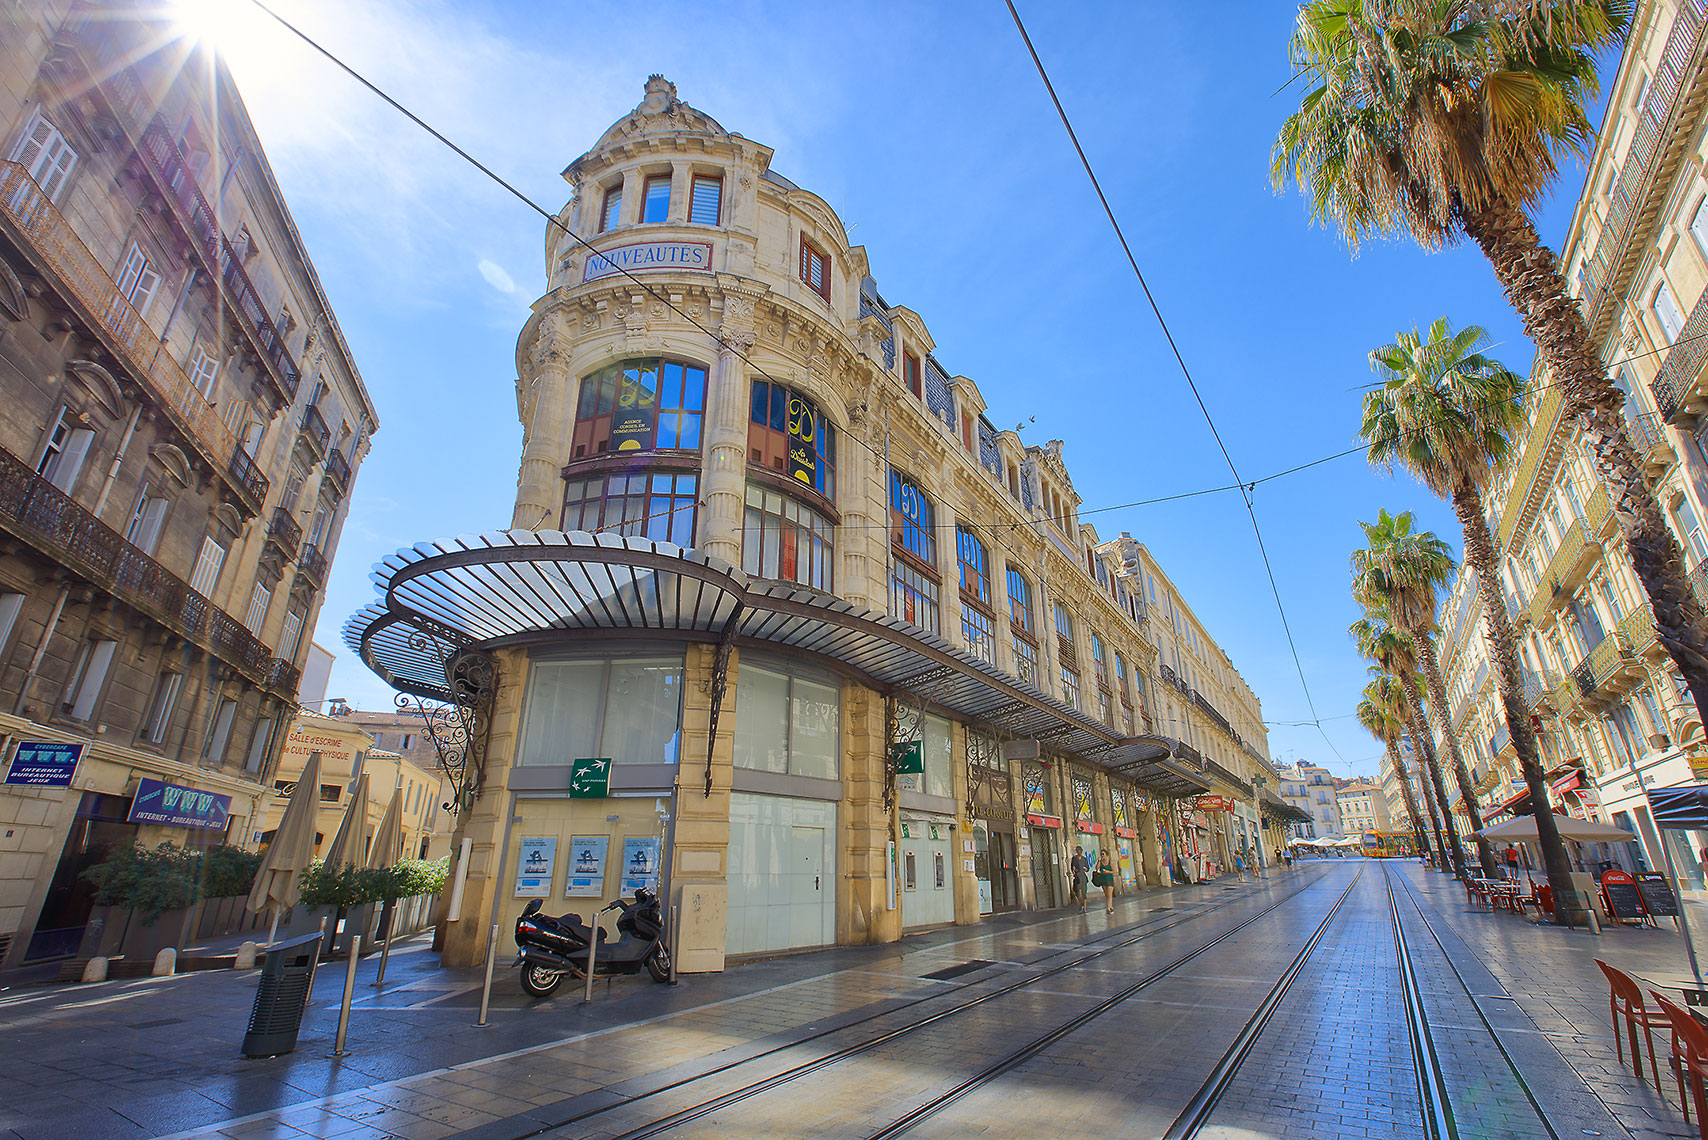 French Architecture with yellow buildings and cobble-stoned street and tram line with sun rising over buildings